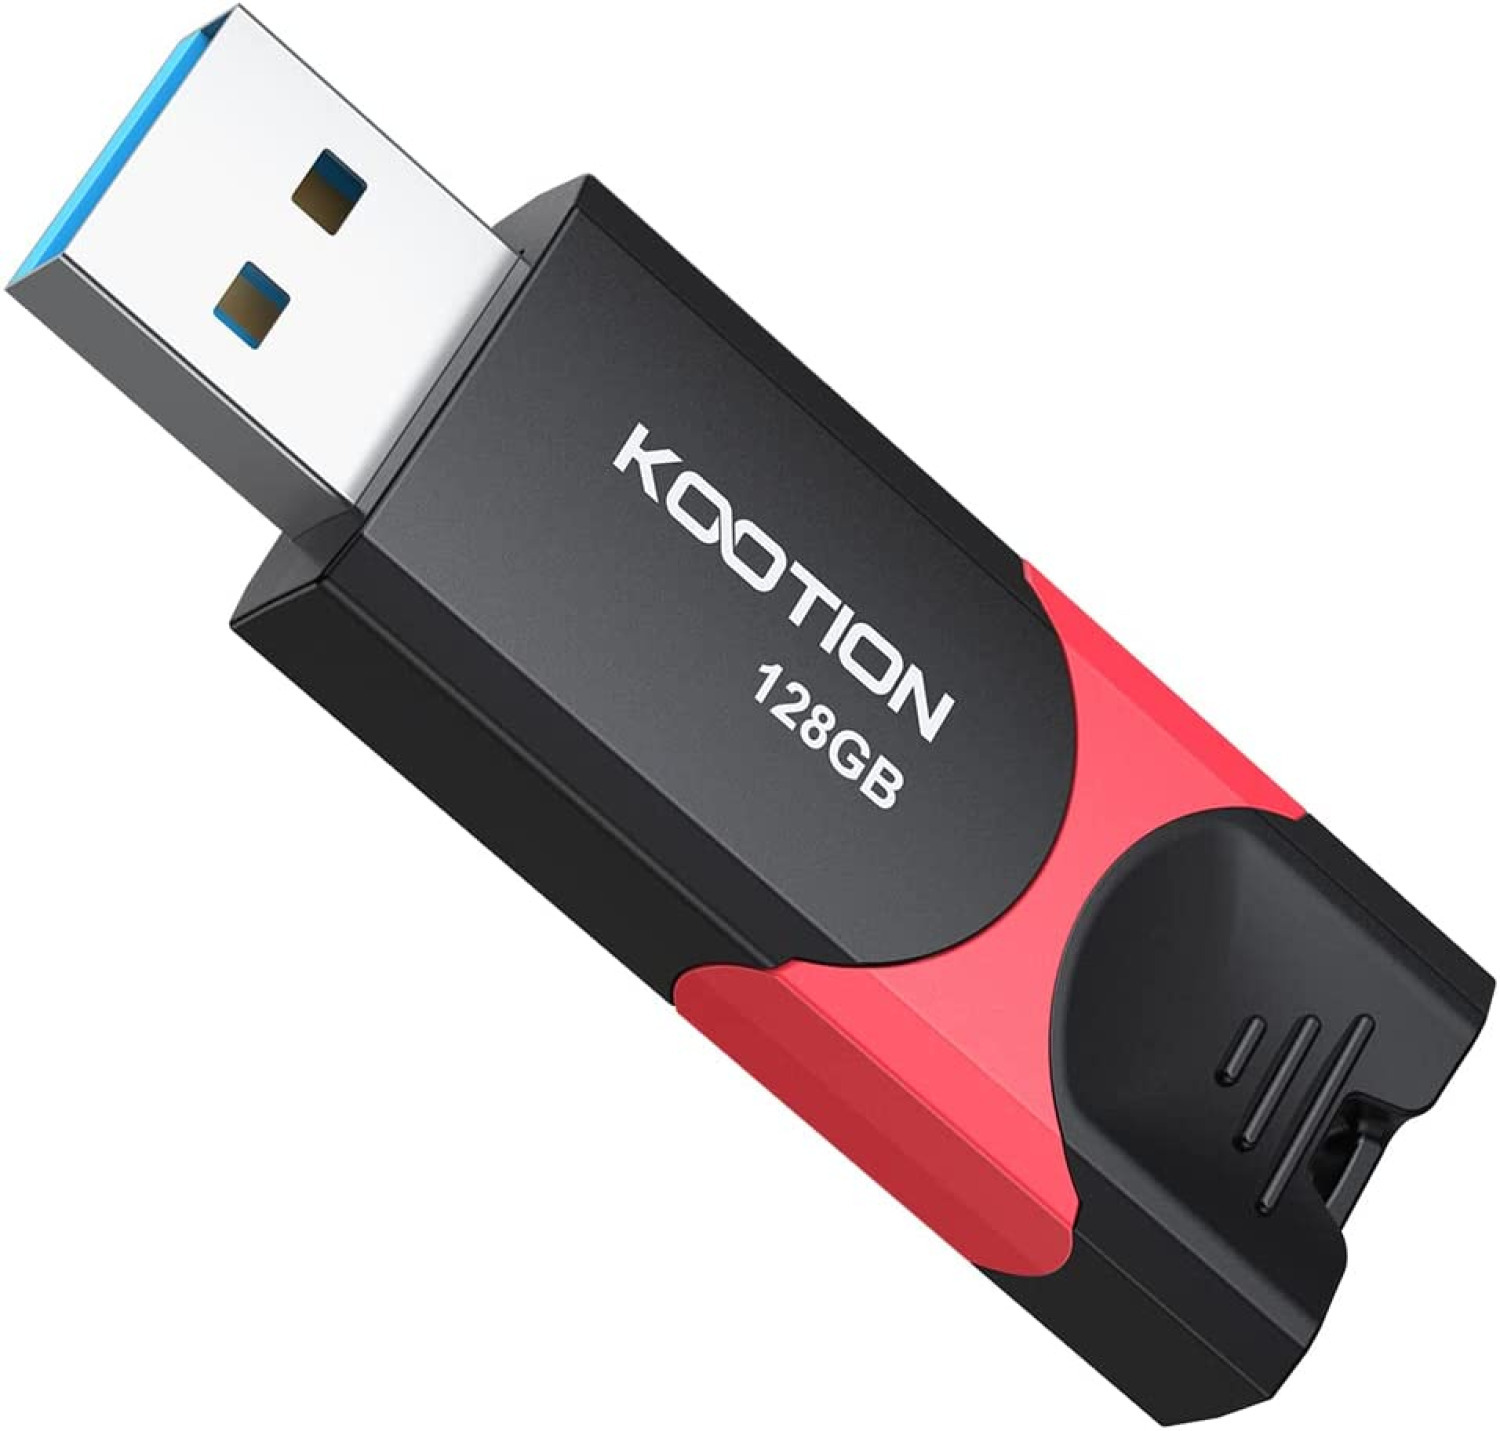 KOOTION 128 GB Ultra High Speed USB 3.0 Flash Drive - $6.60 + Free Shipping W/Prime or $25+